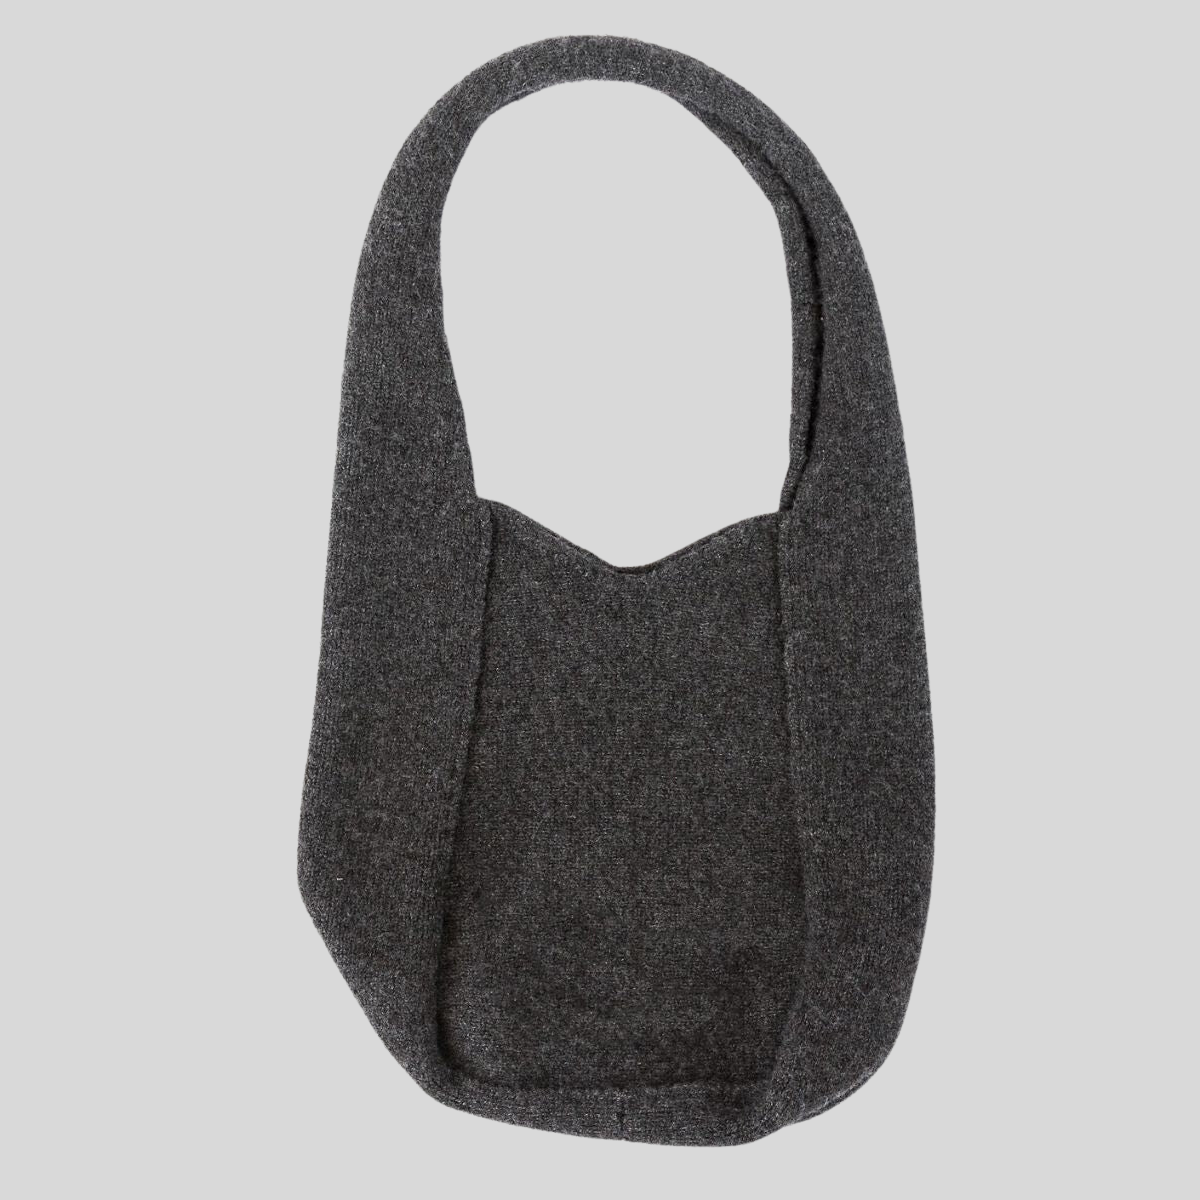 Gotstyle Fashion - Lyla & Luxe Bags Knit Tote Bag - Charcoal